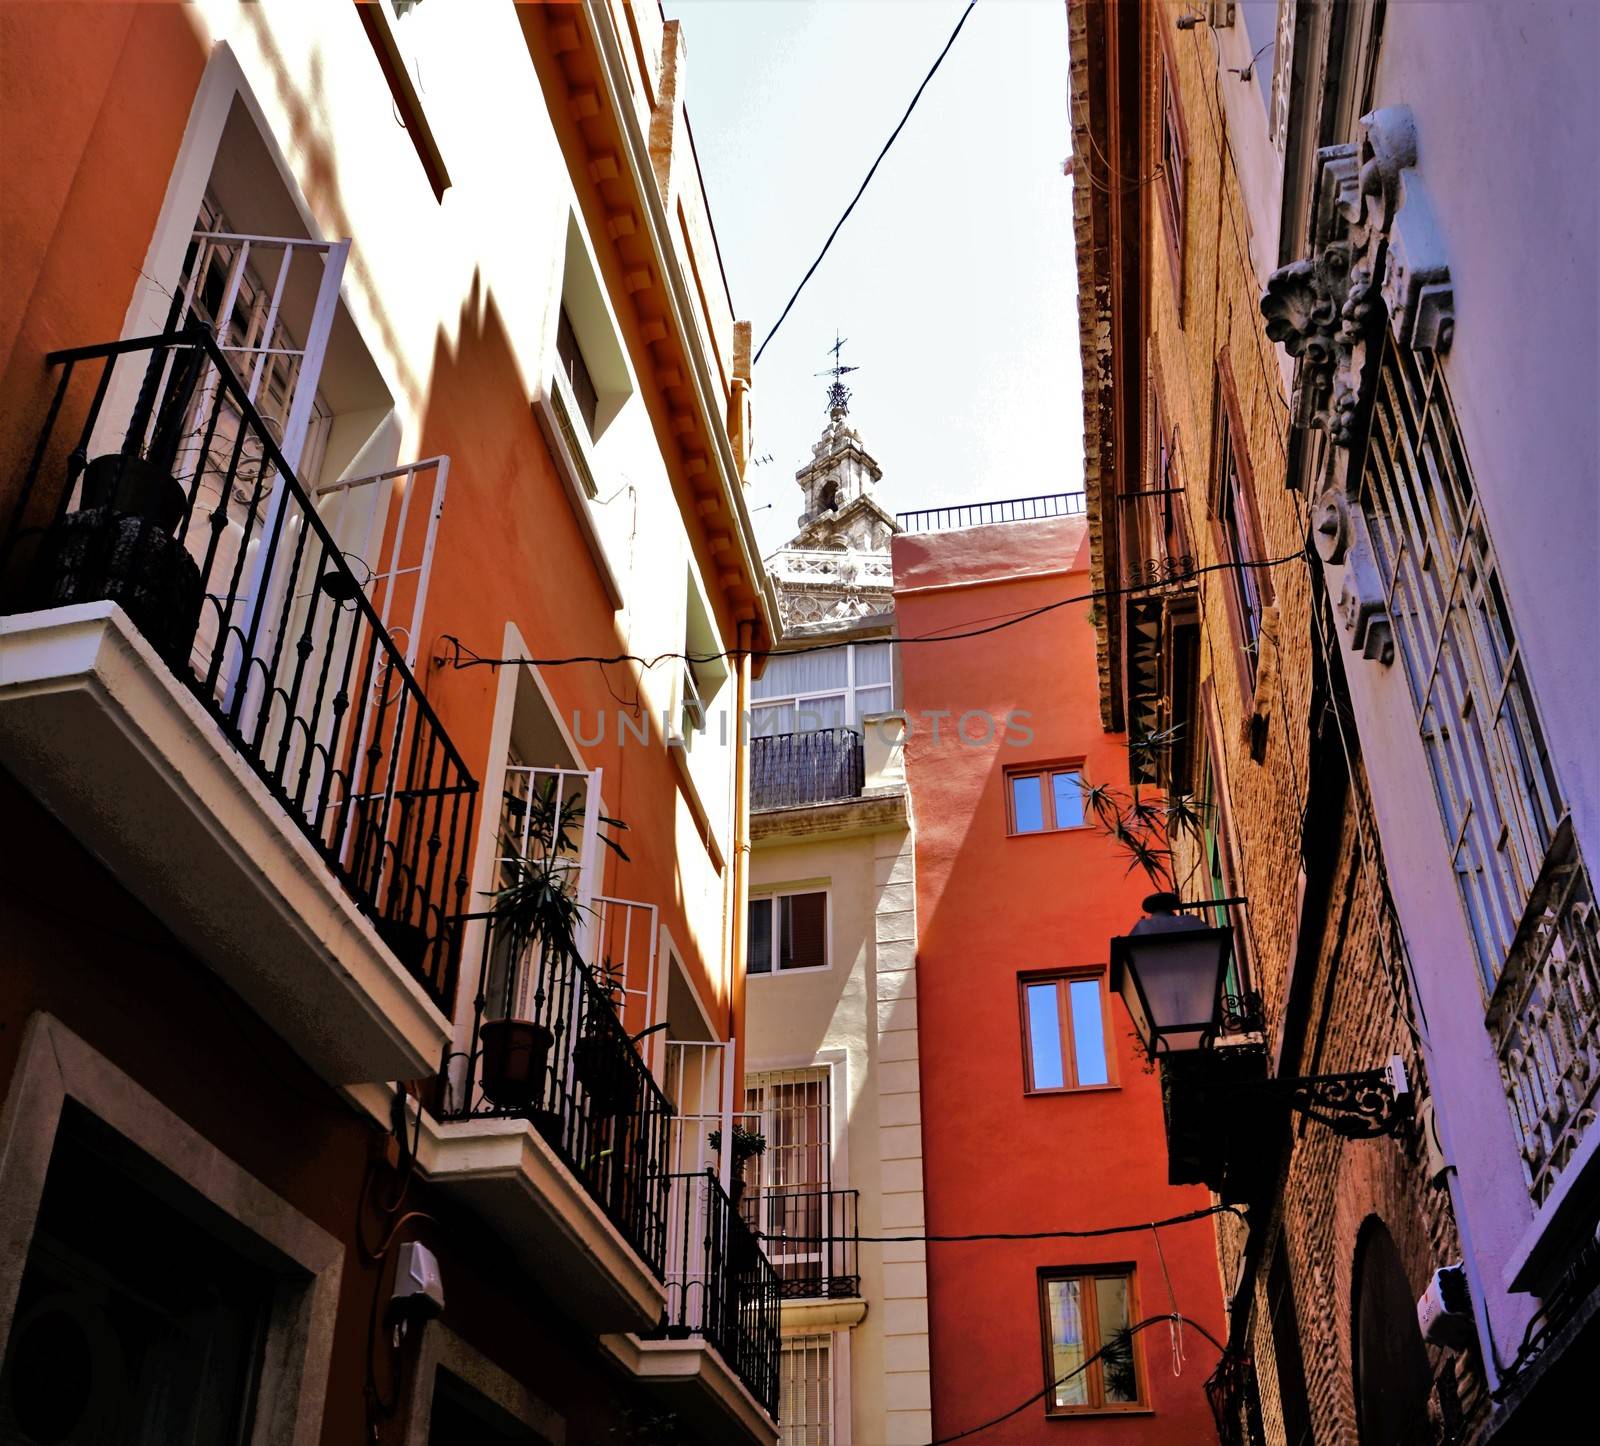 Tranquil street in the city center of Valencia, Spain